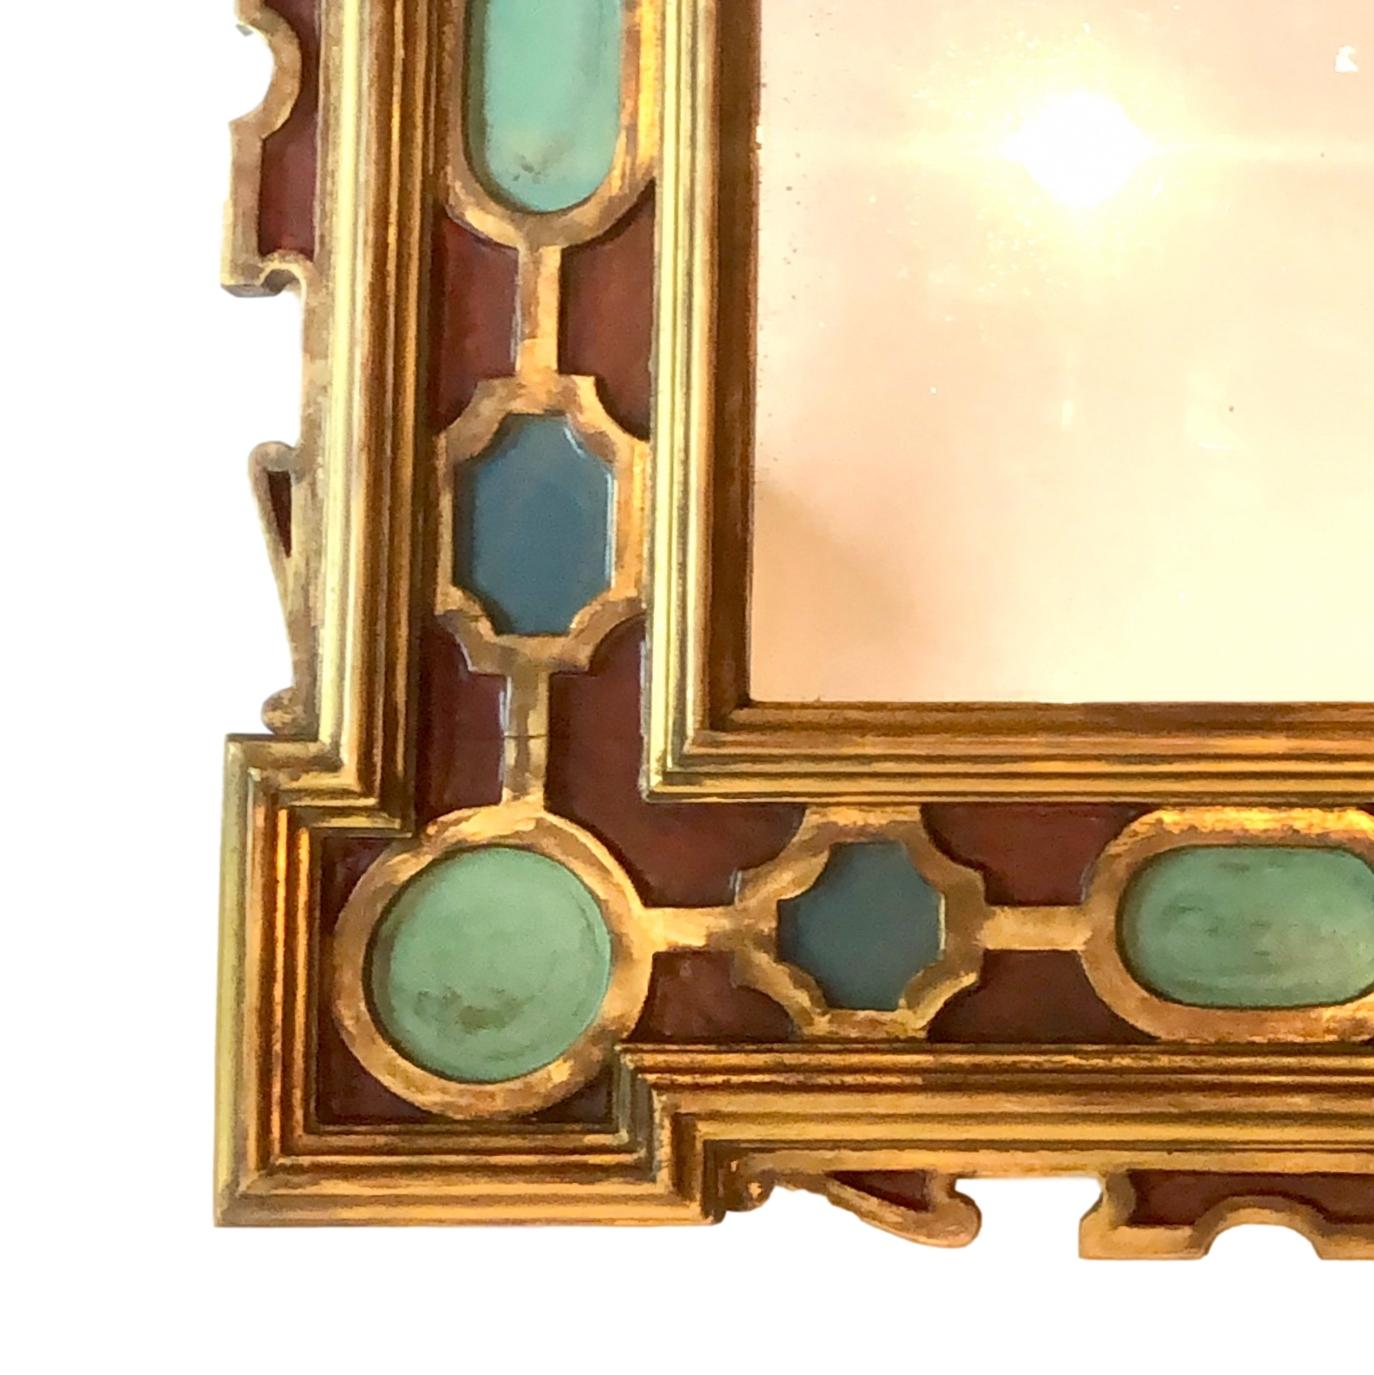 A circa 1920's Italian gilt mirror with a painted frame. 

Measurements:
Height: 32